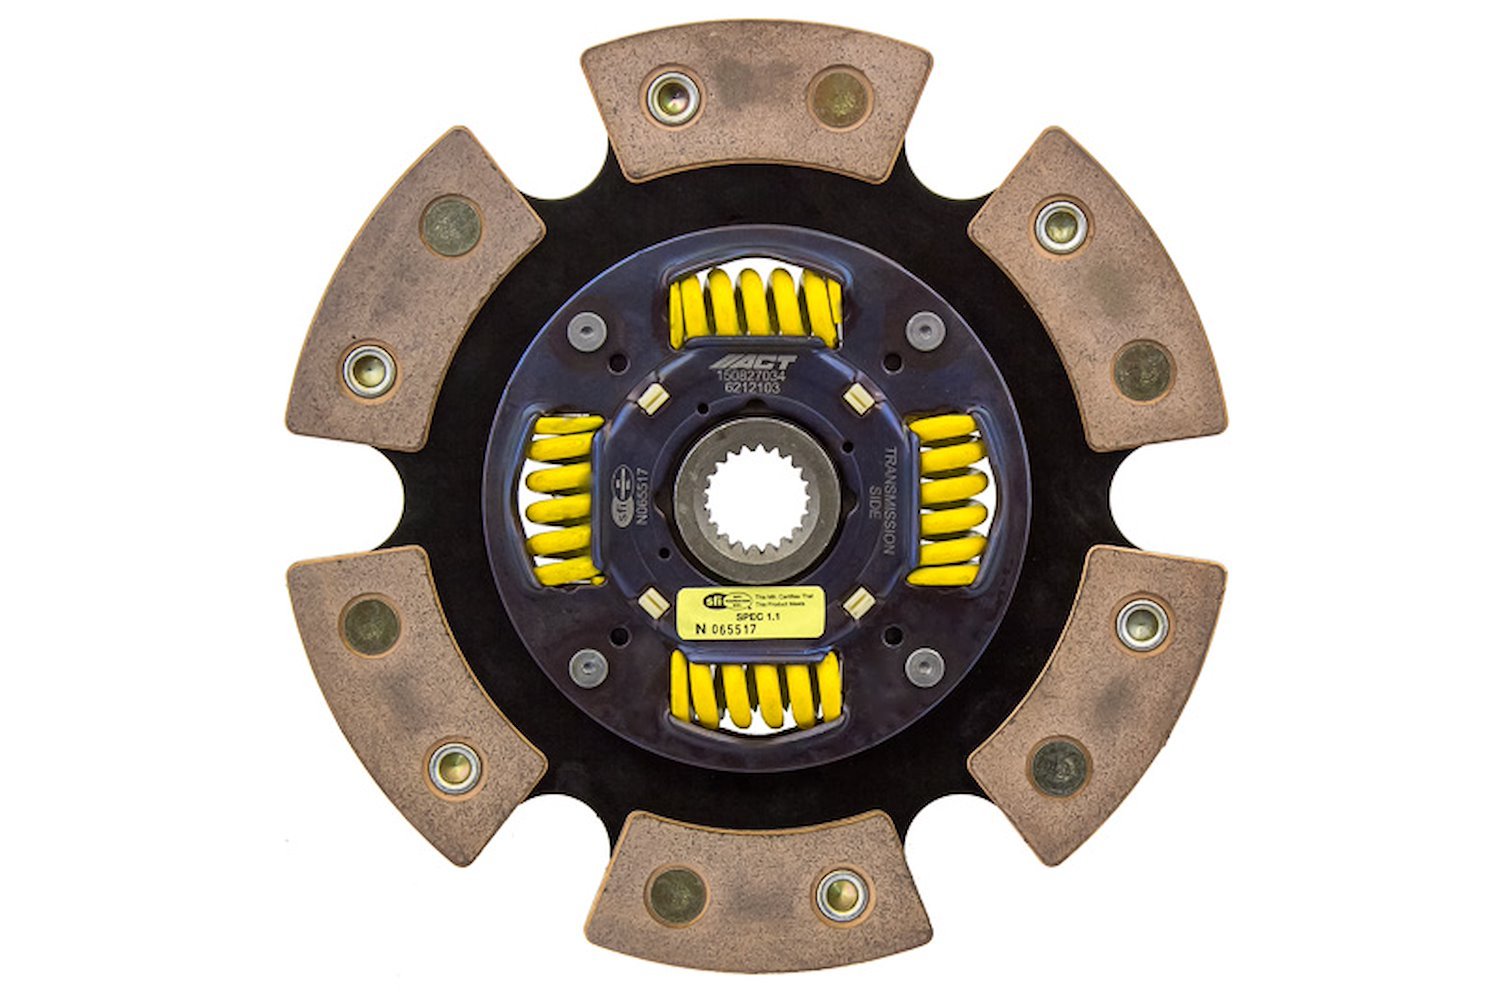 6-Pad Sprung Race Disc Transmission Clutch Friction Plate